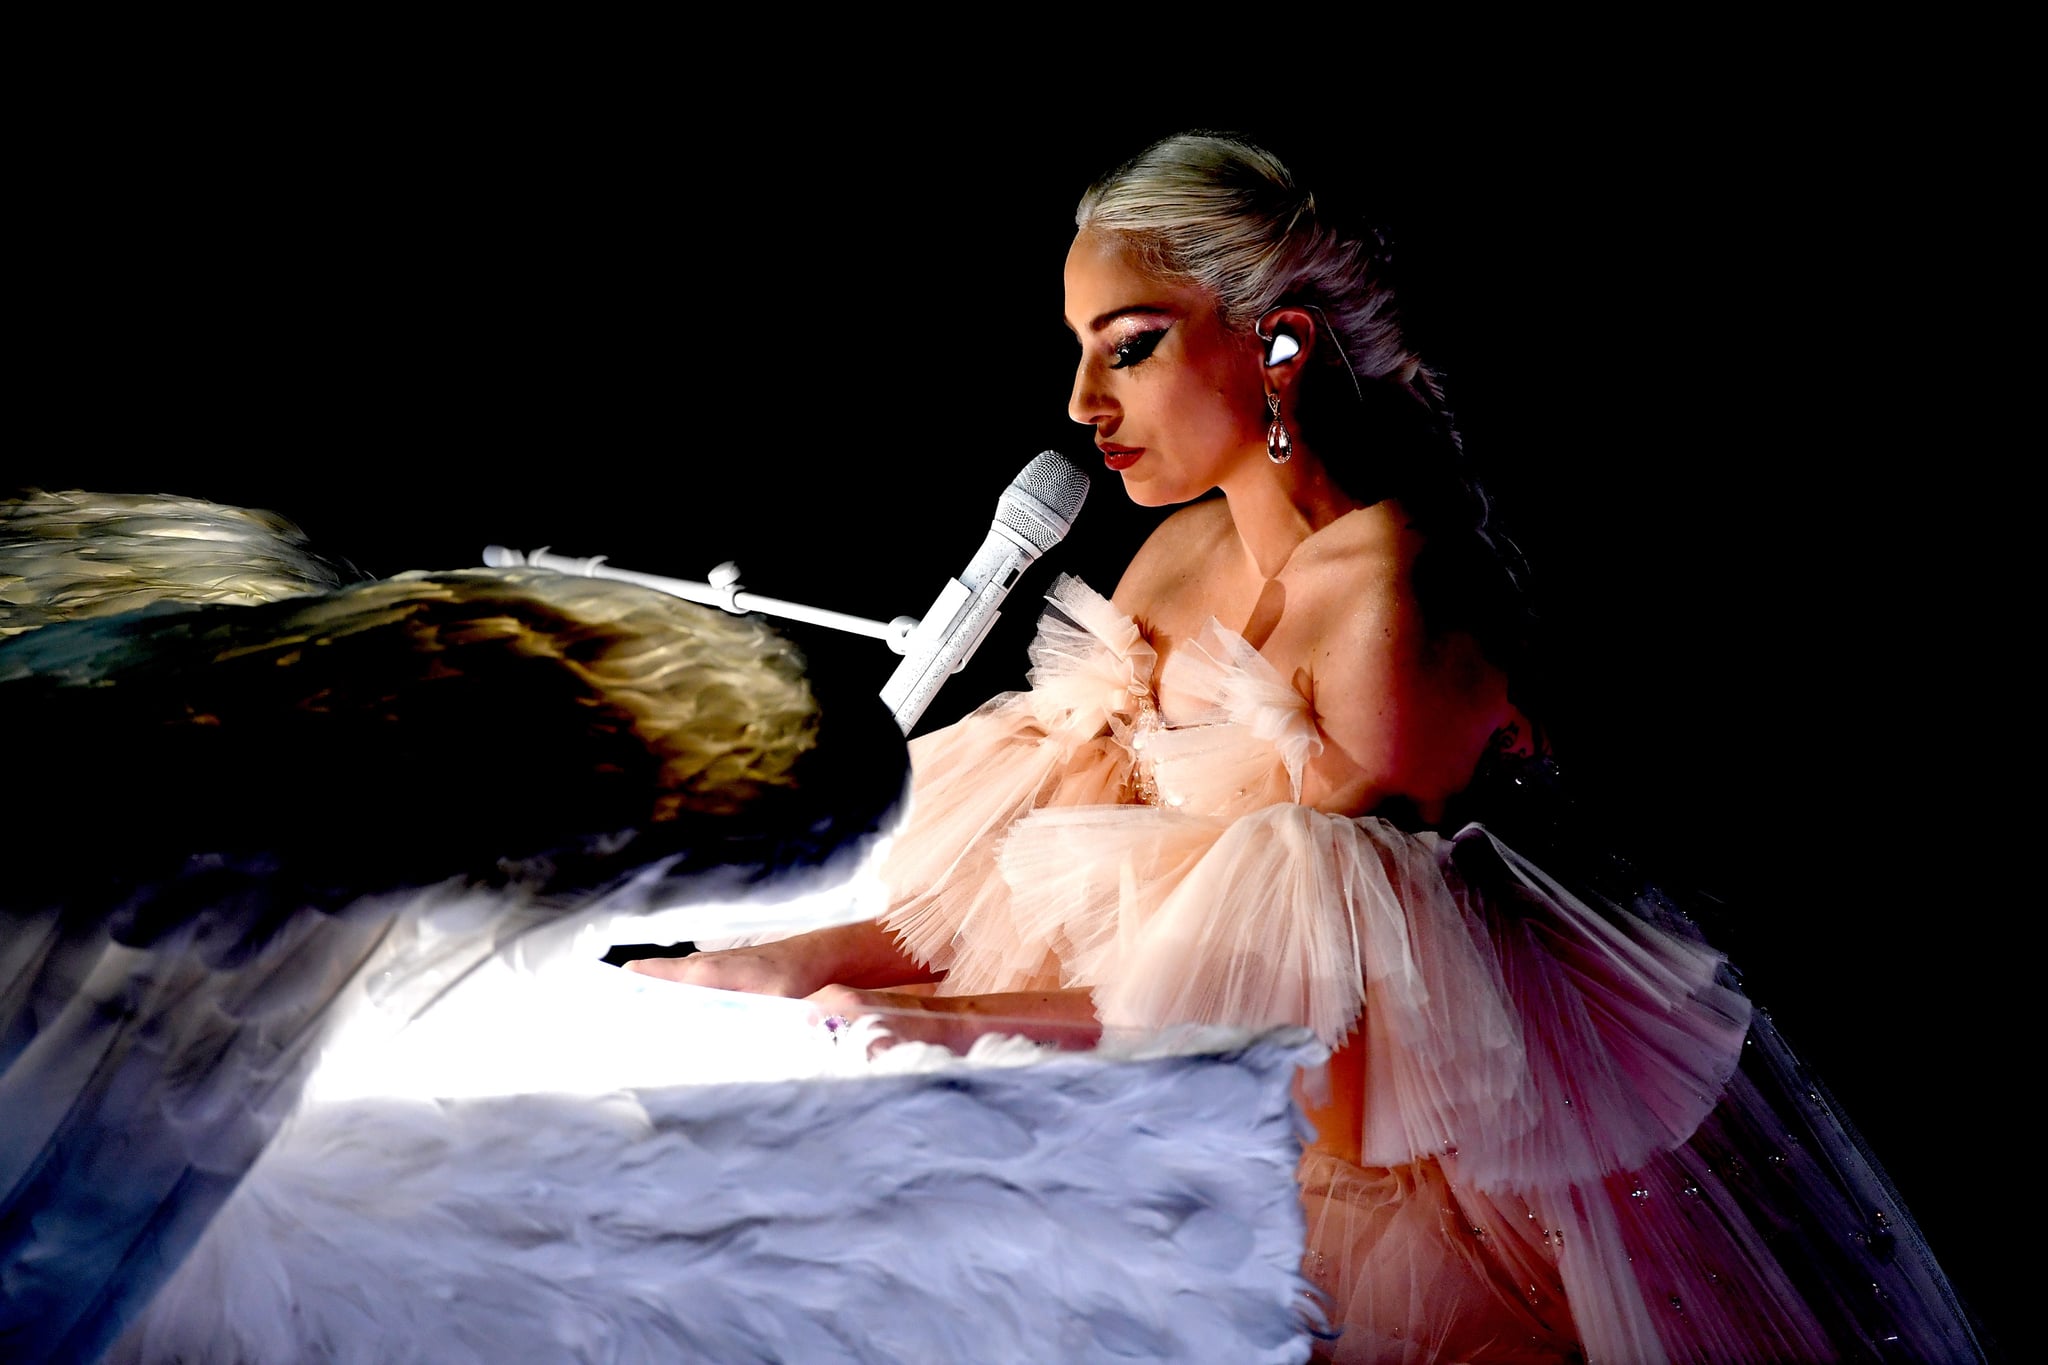 In 2018, Lady Gaga delivered an emotional performance of "Joanne" and "Million Reasons."